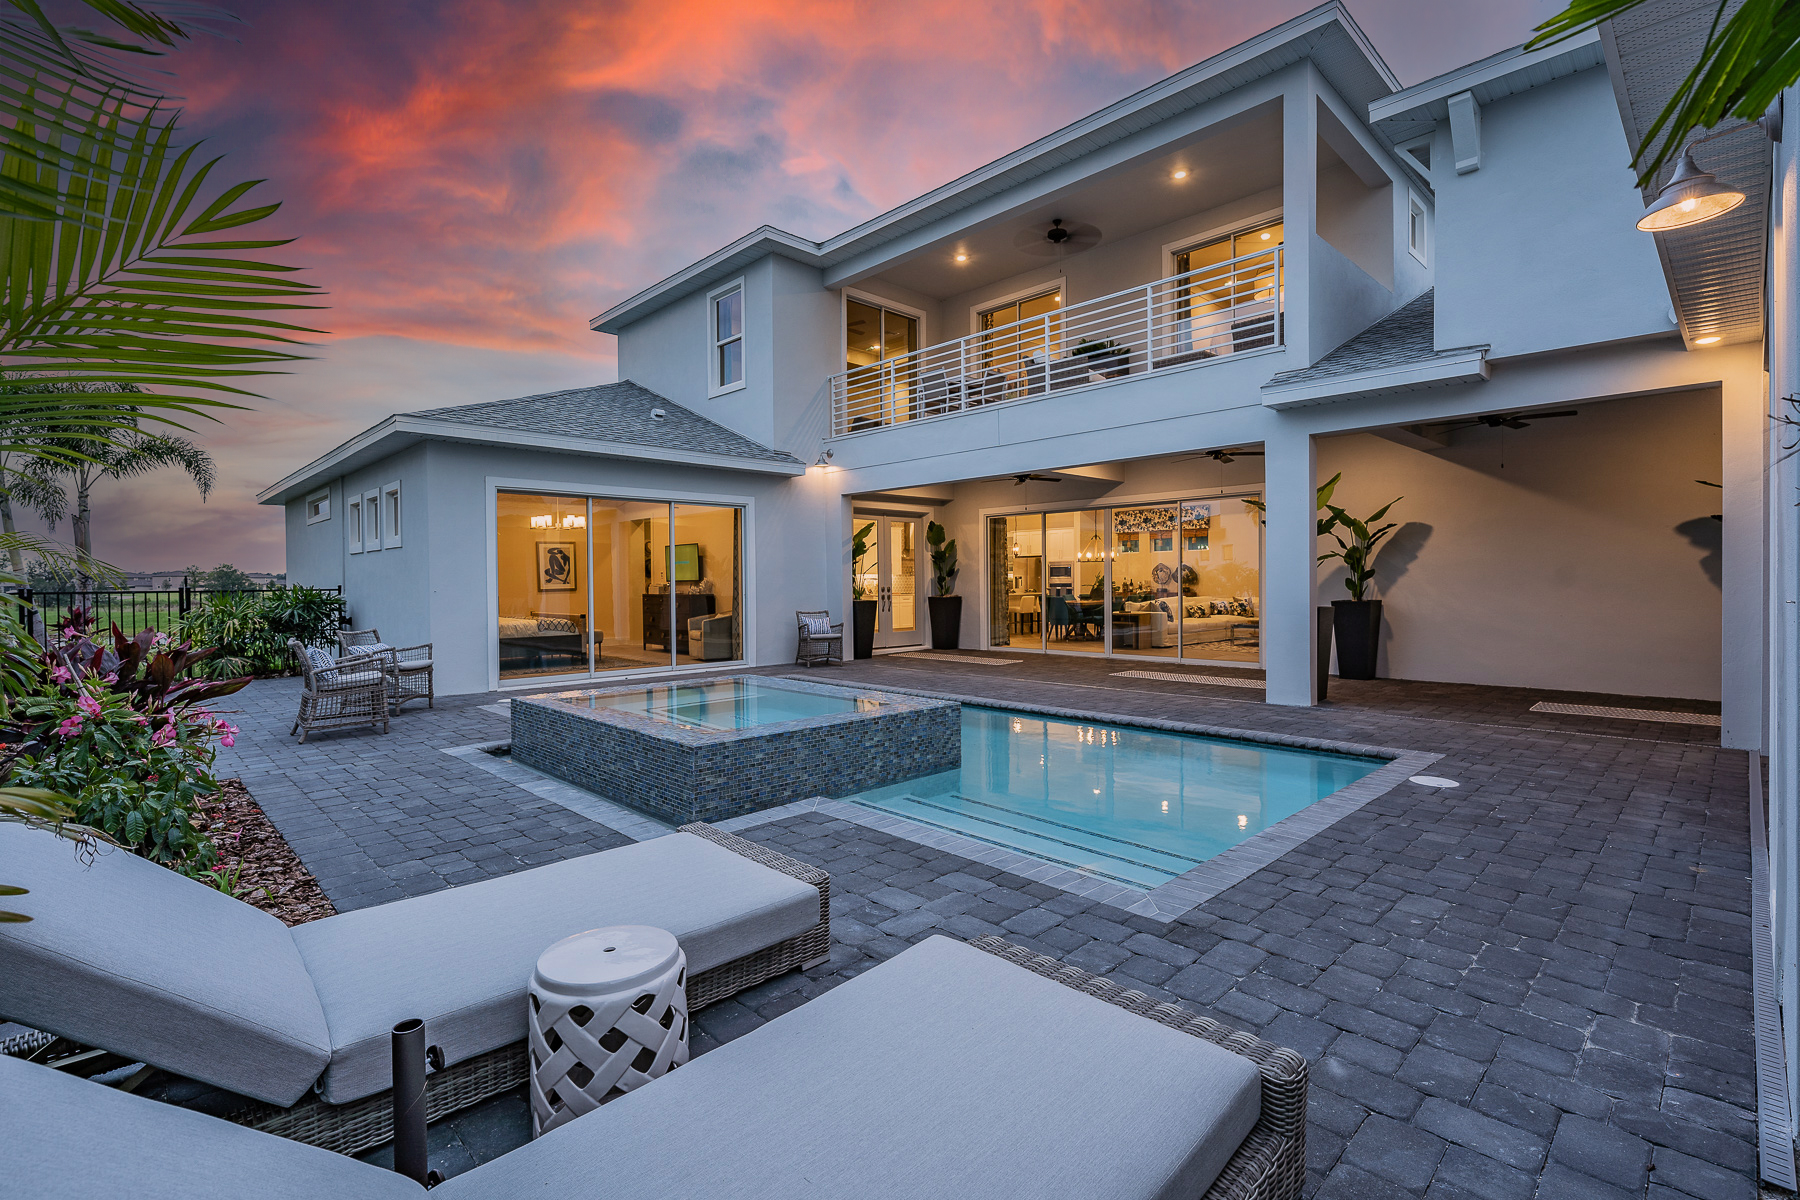 Back patio of a home with a pool at sunset